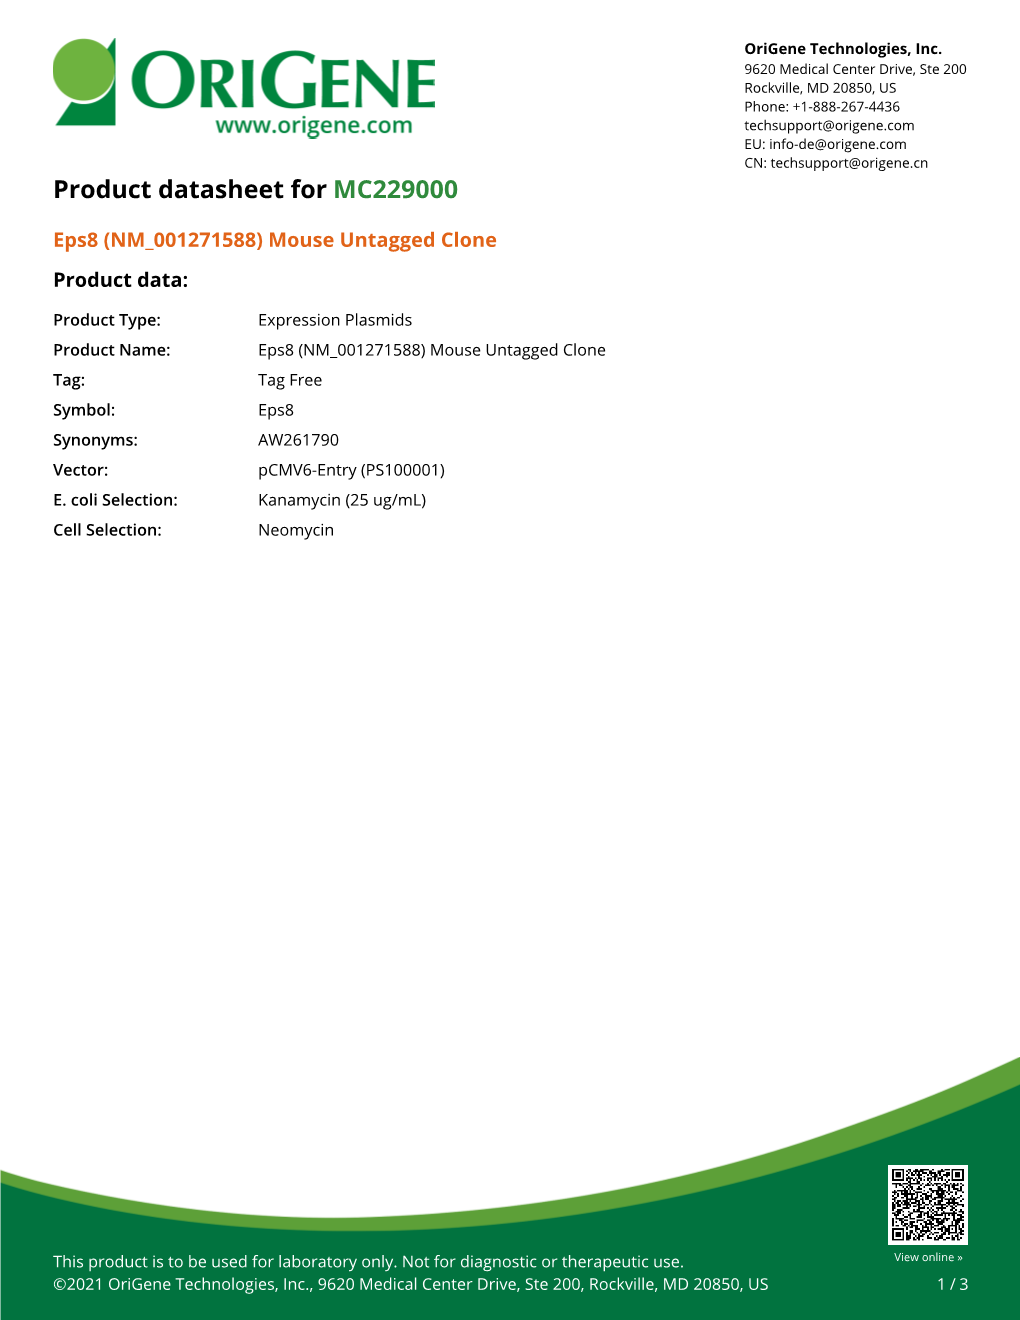 Eps8 (NM 001271588) Mouse Untagged Clone Product Data